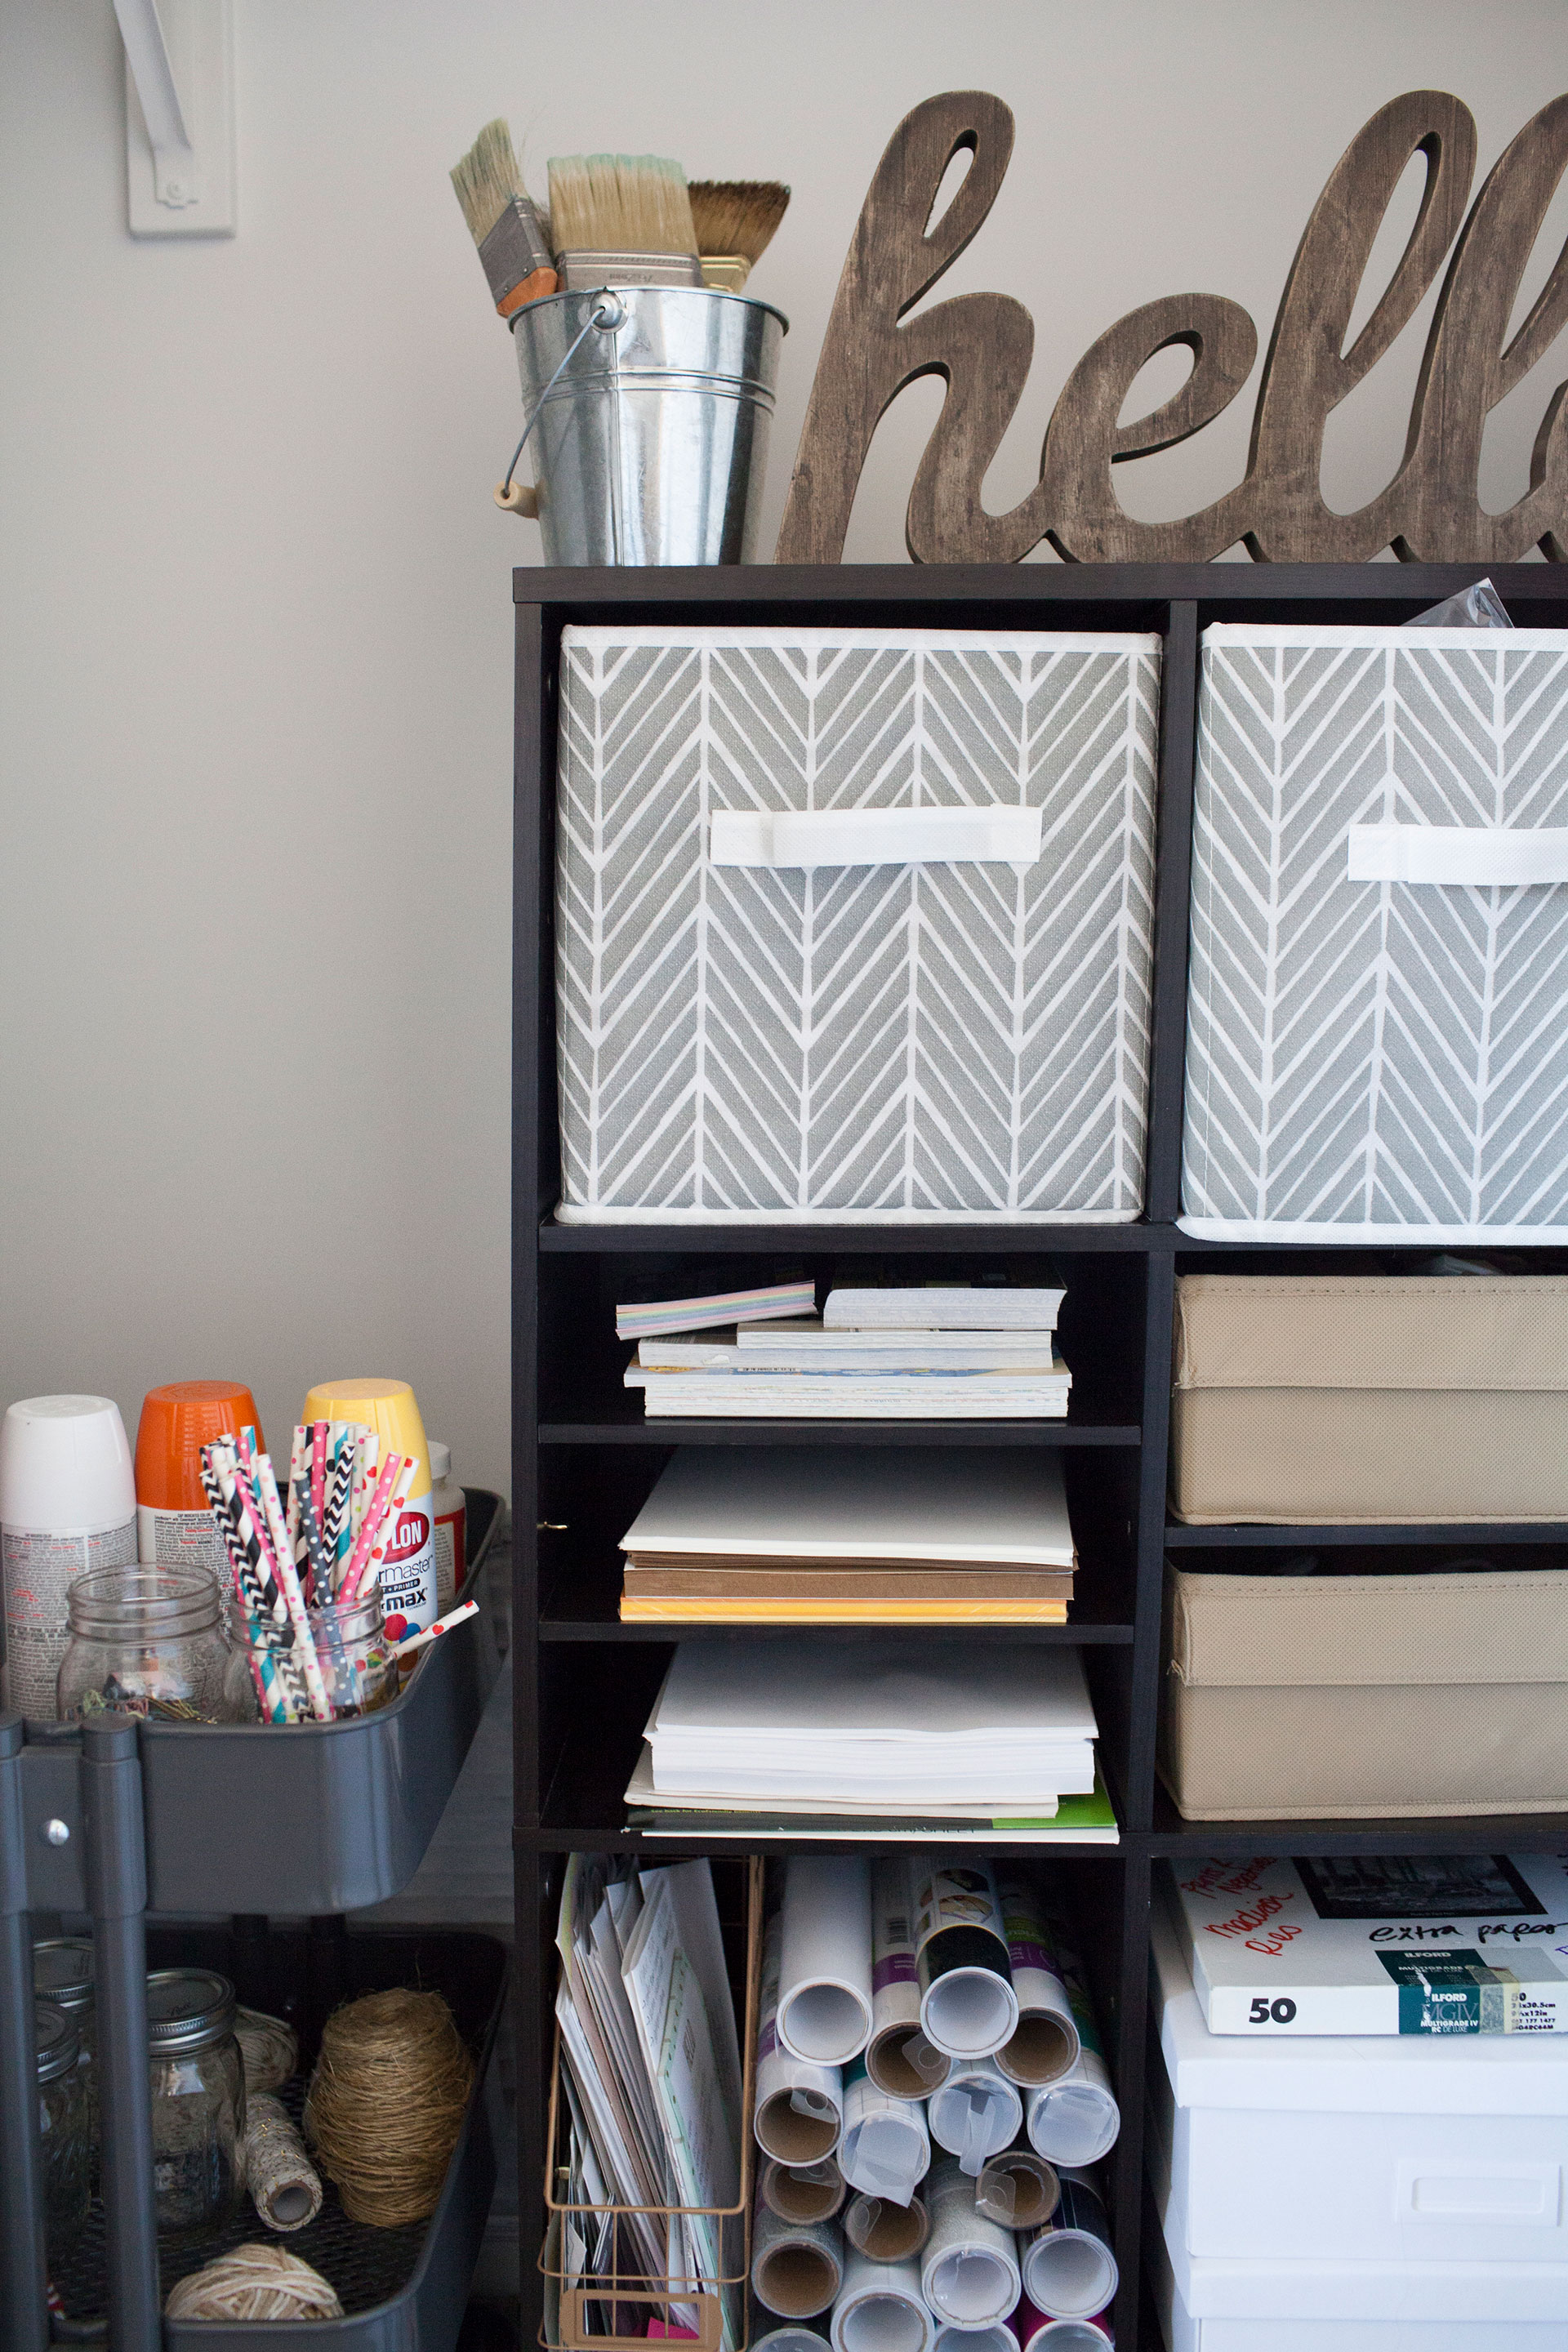 Turn Any Closet Into a Craft Closet With These Organization Ideas